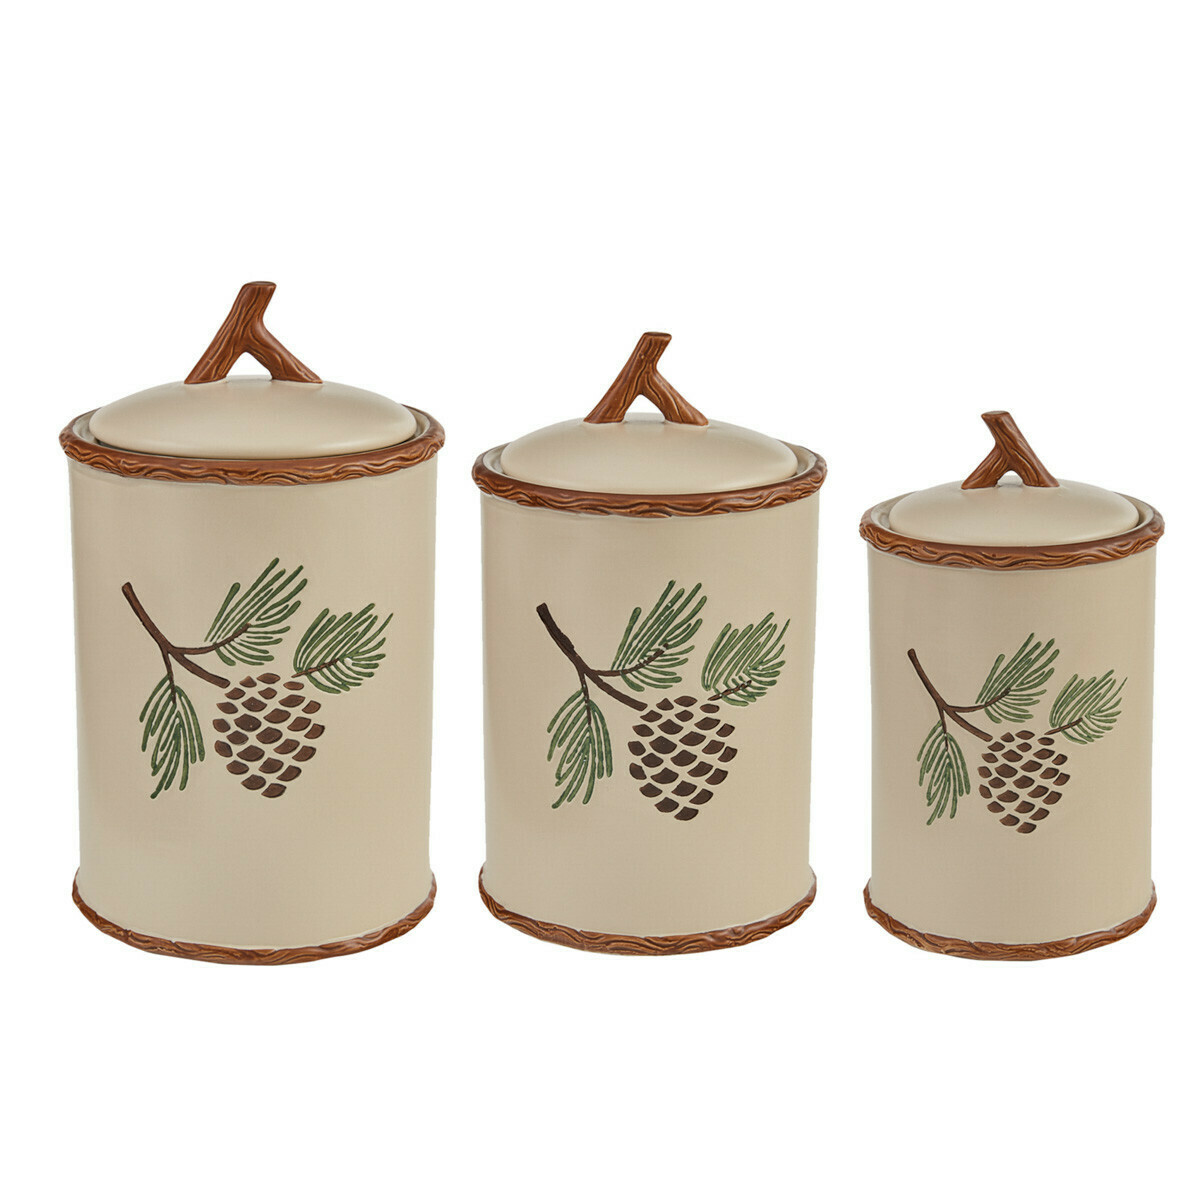 Pinecroft Canister Set